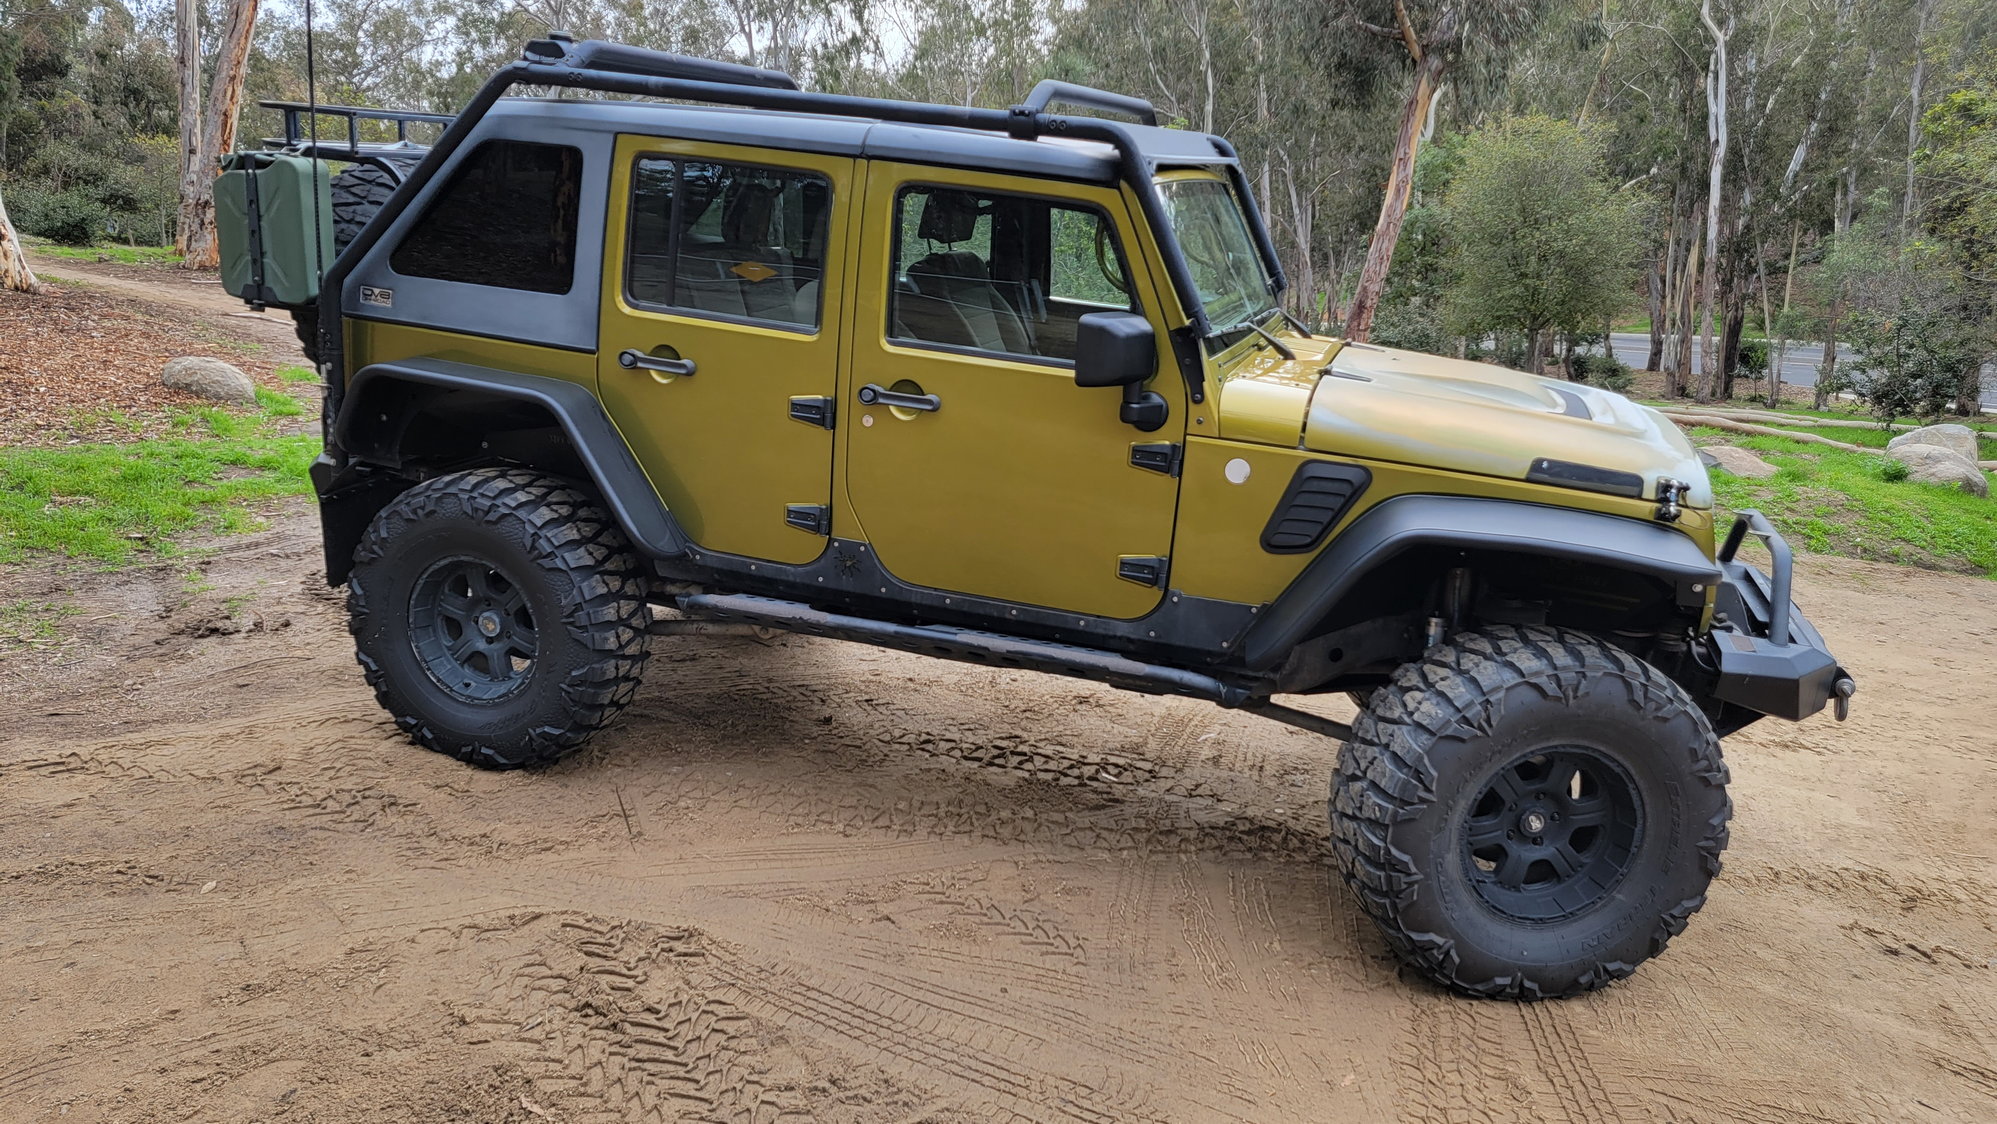 Jeep JK Wrangler Rubicon 2007 4-door - offroad/rock crawl/overland   - The top destination for Jeep JK and JL Wrangler news, rumors, and  discussion